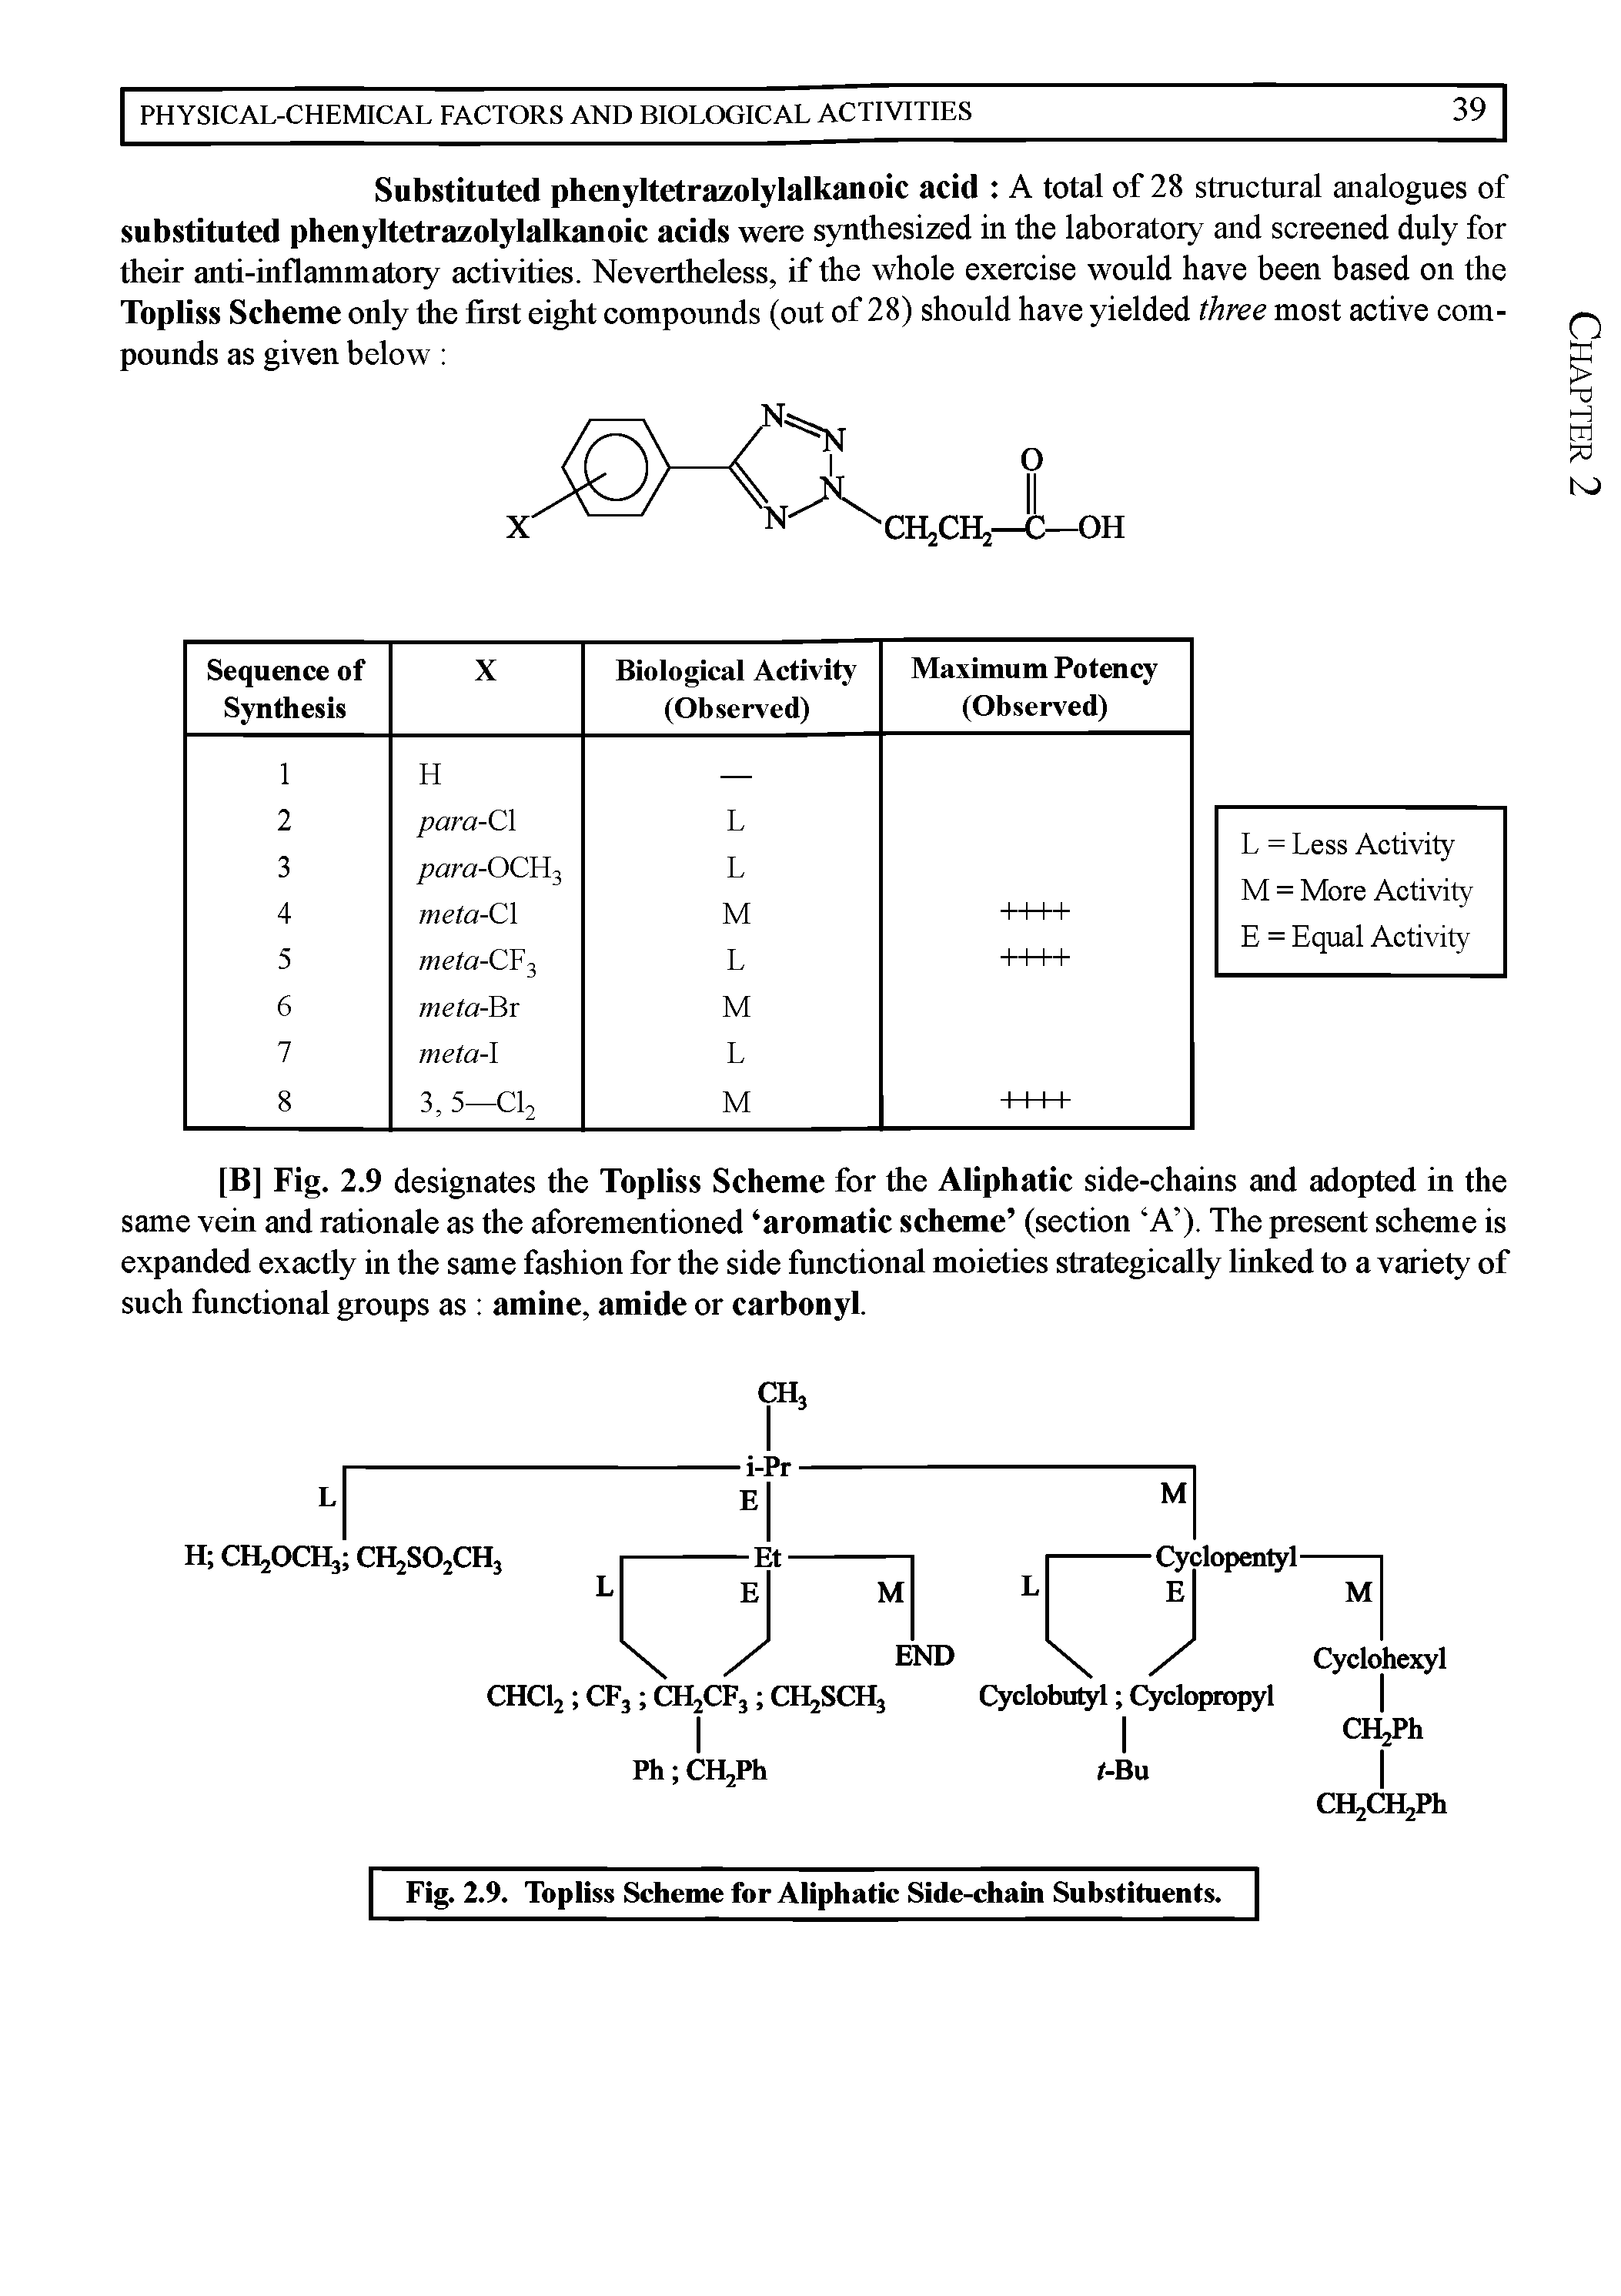 Fig. 2.9. Topliss Scheme for Aliphatic Side-chain Substituents.